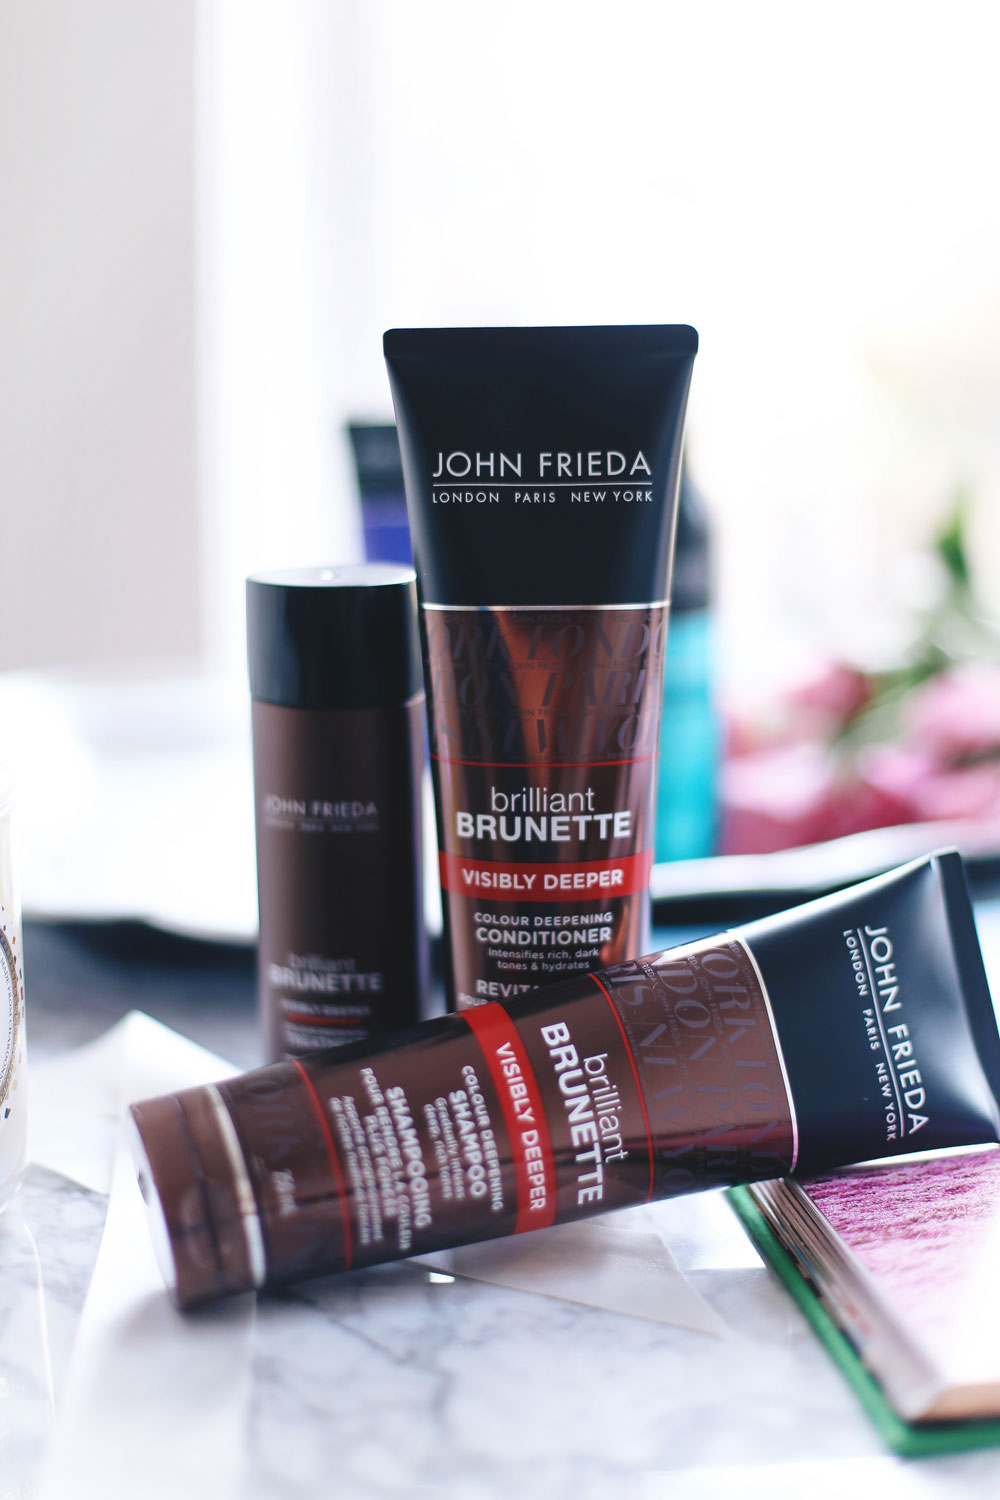 Second day hair styles using John Frieda products, including Luxurious Volume line, Brilliant Brunette Visibly Deeper Collection, Colour Deepening Treatment styled by To Vogue or Bust